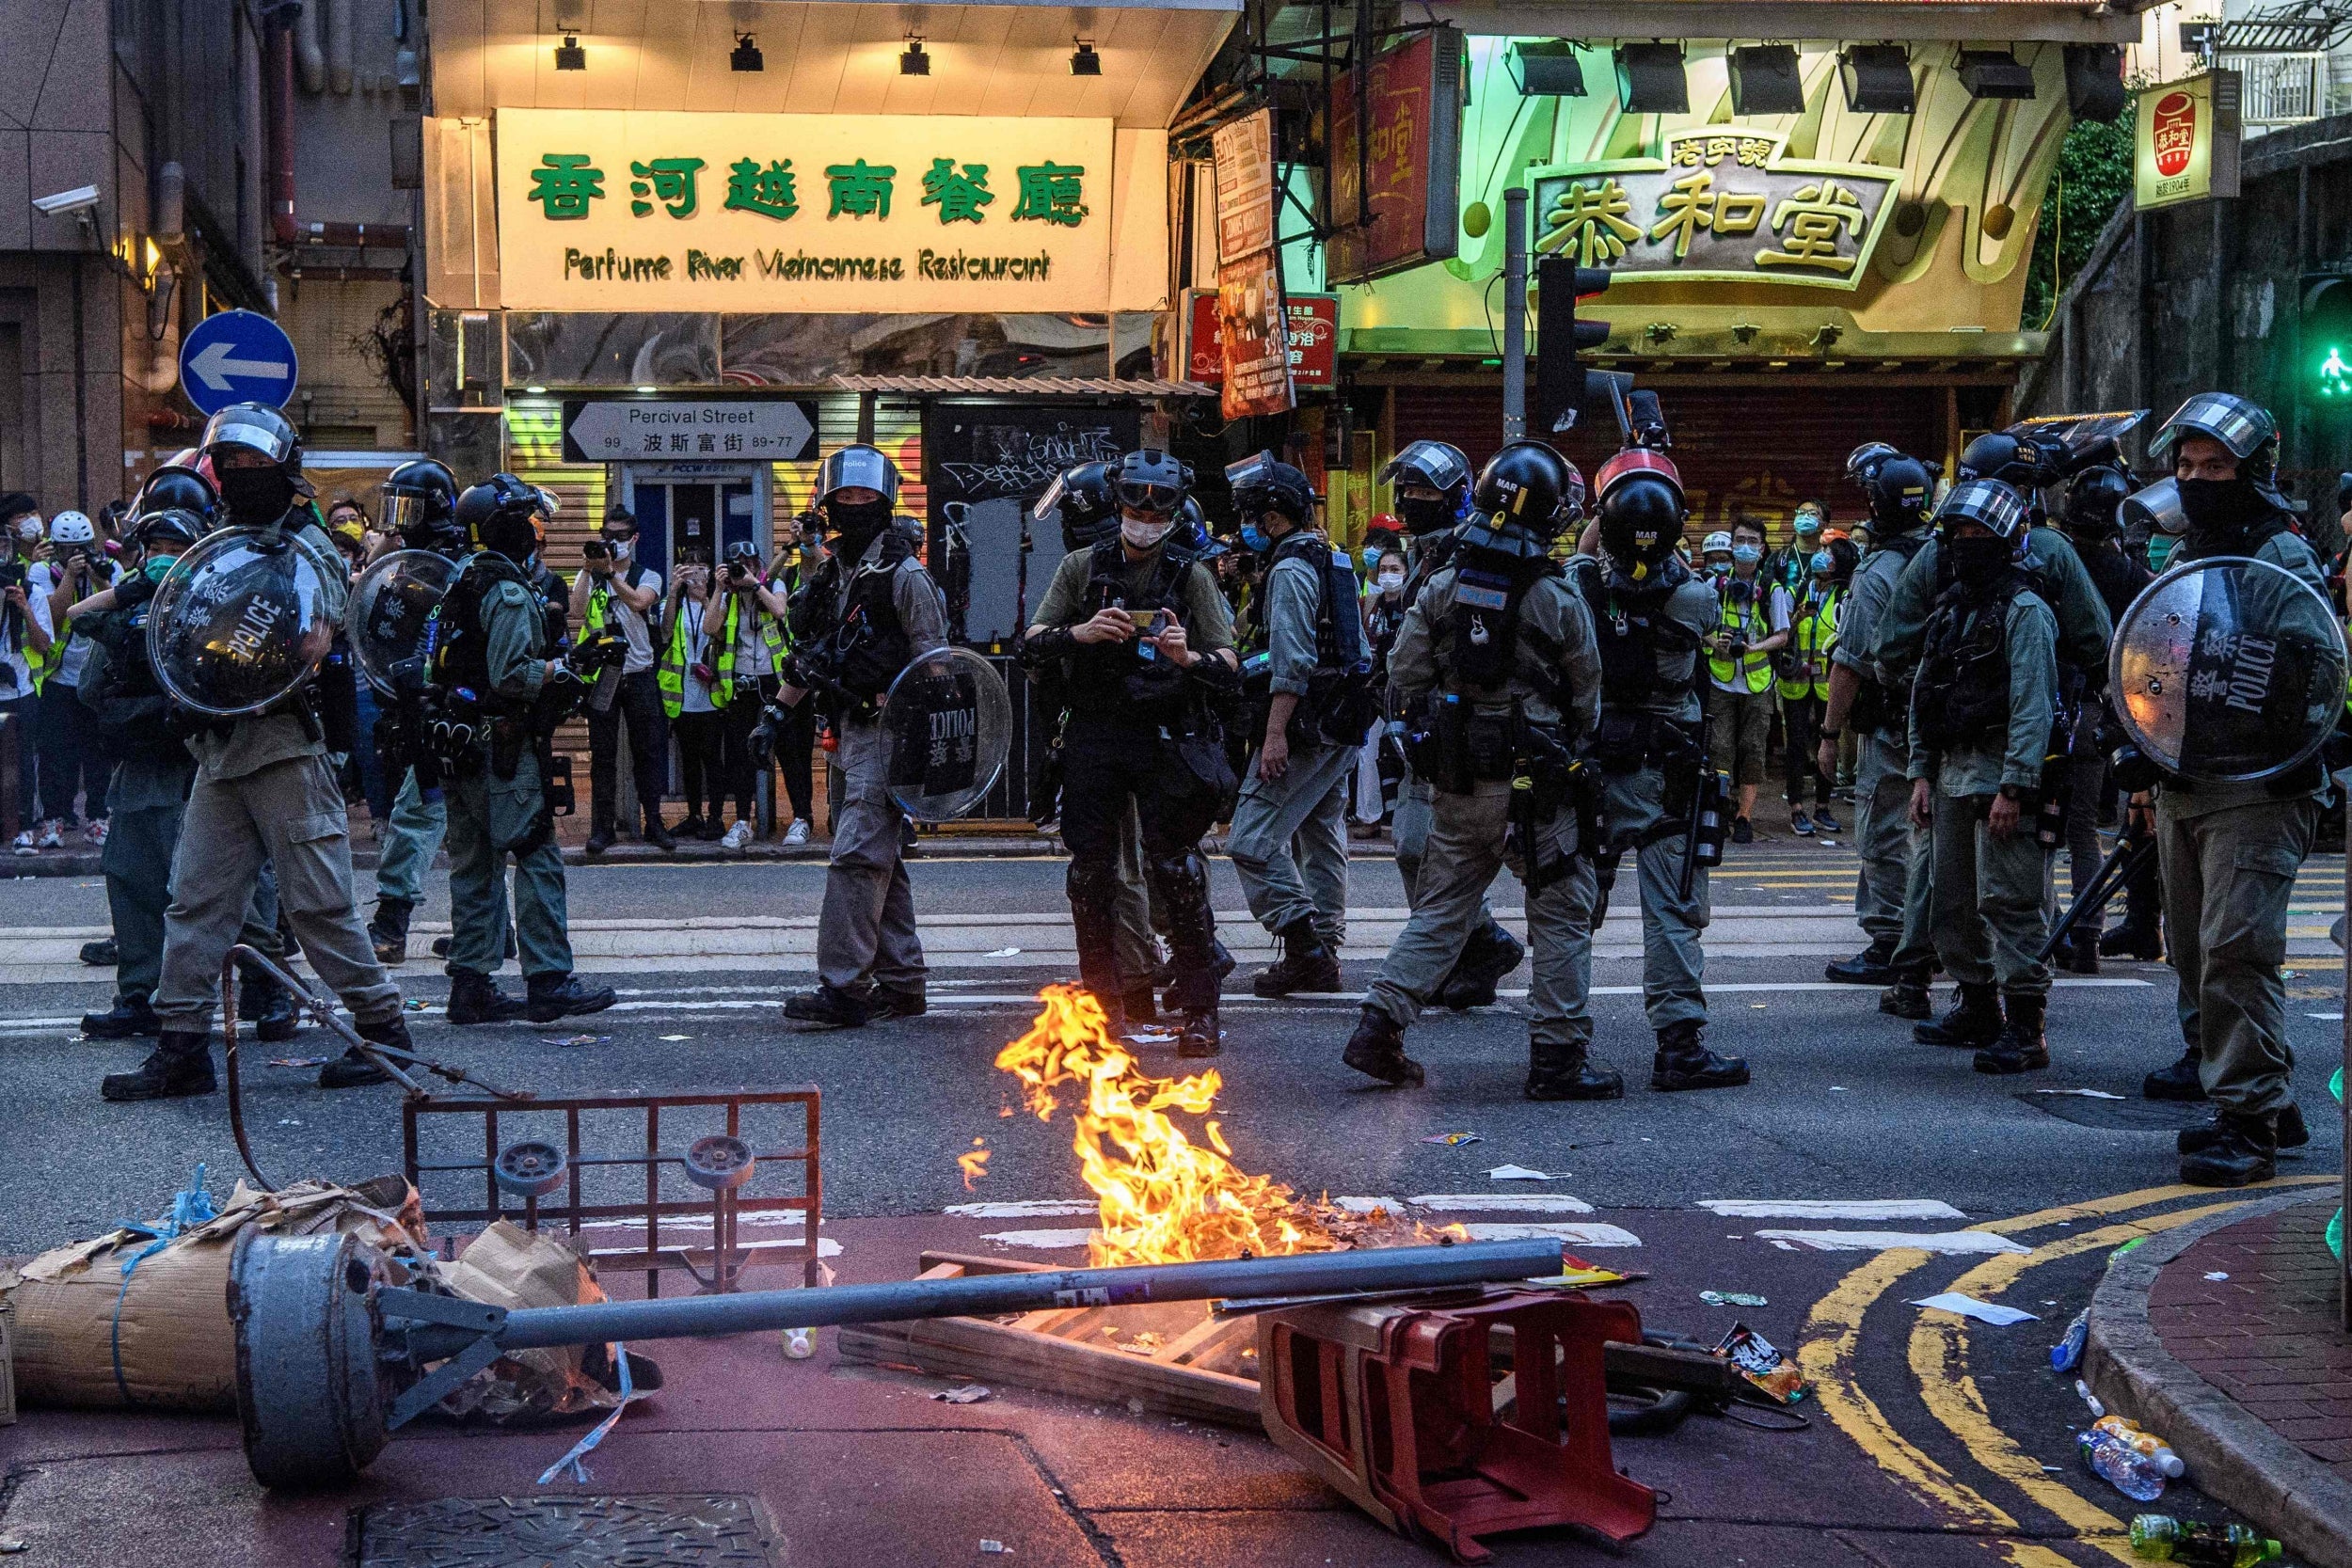 Police walk past a burning barricade set up by protesters during a rally against the law in Hong Kong on Wednesday